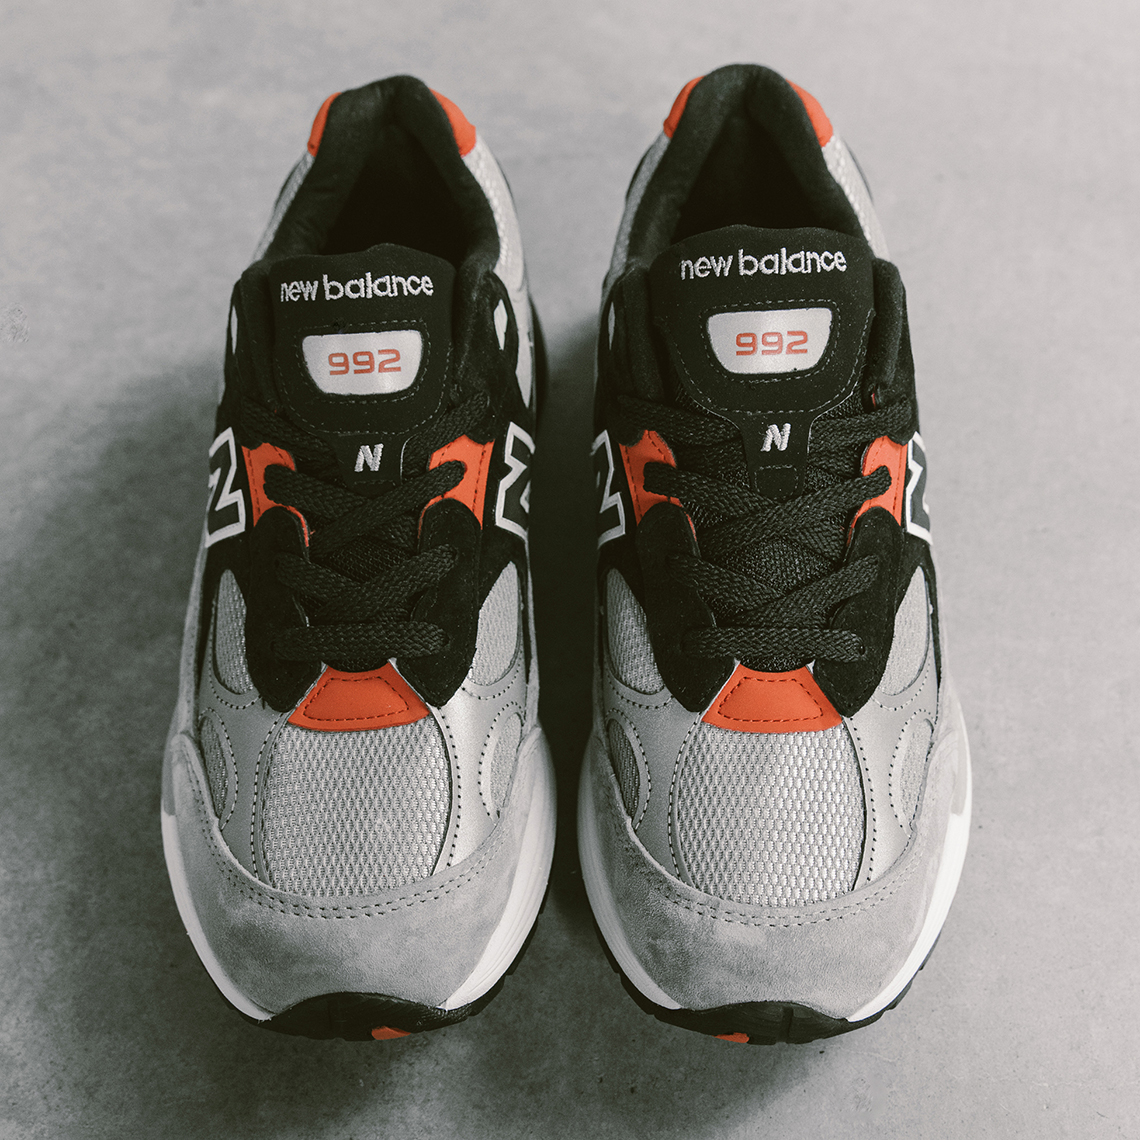 New Balance 992 DTLR DC Discover Celebrate Release Date 